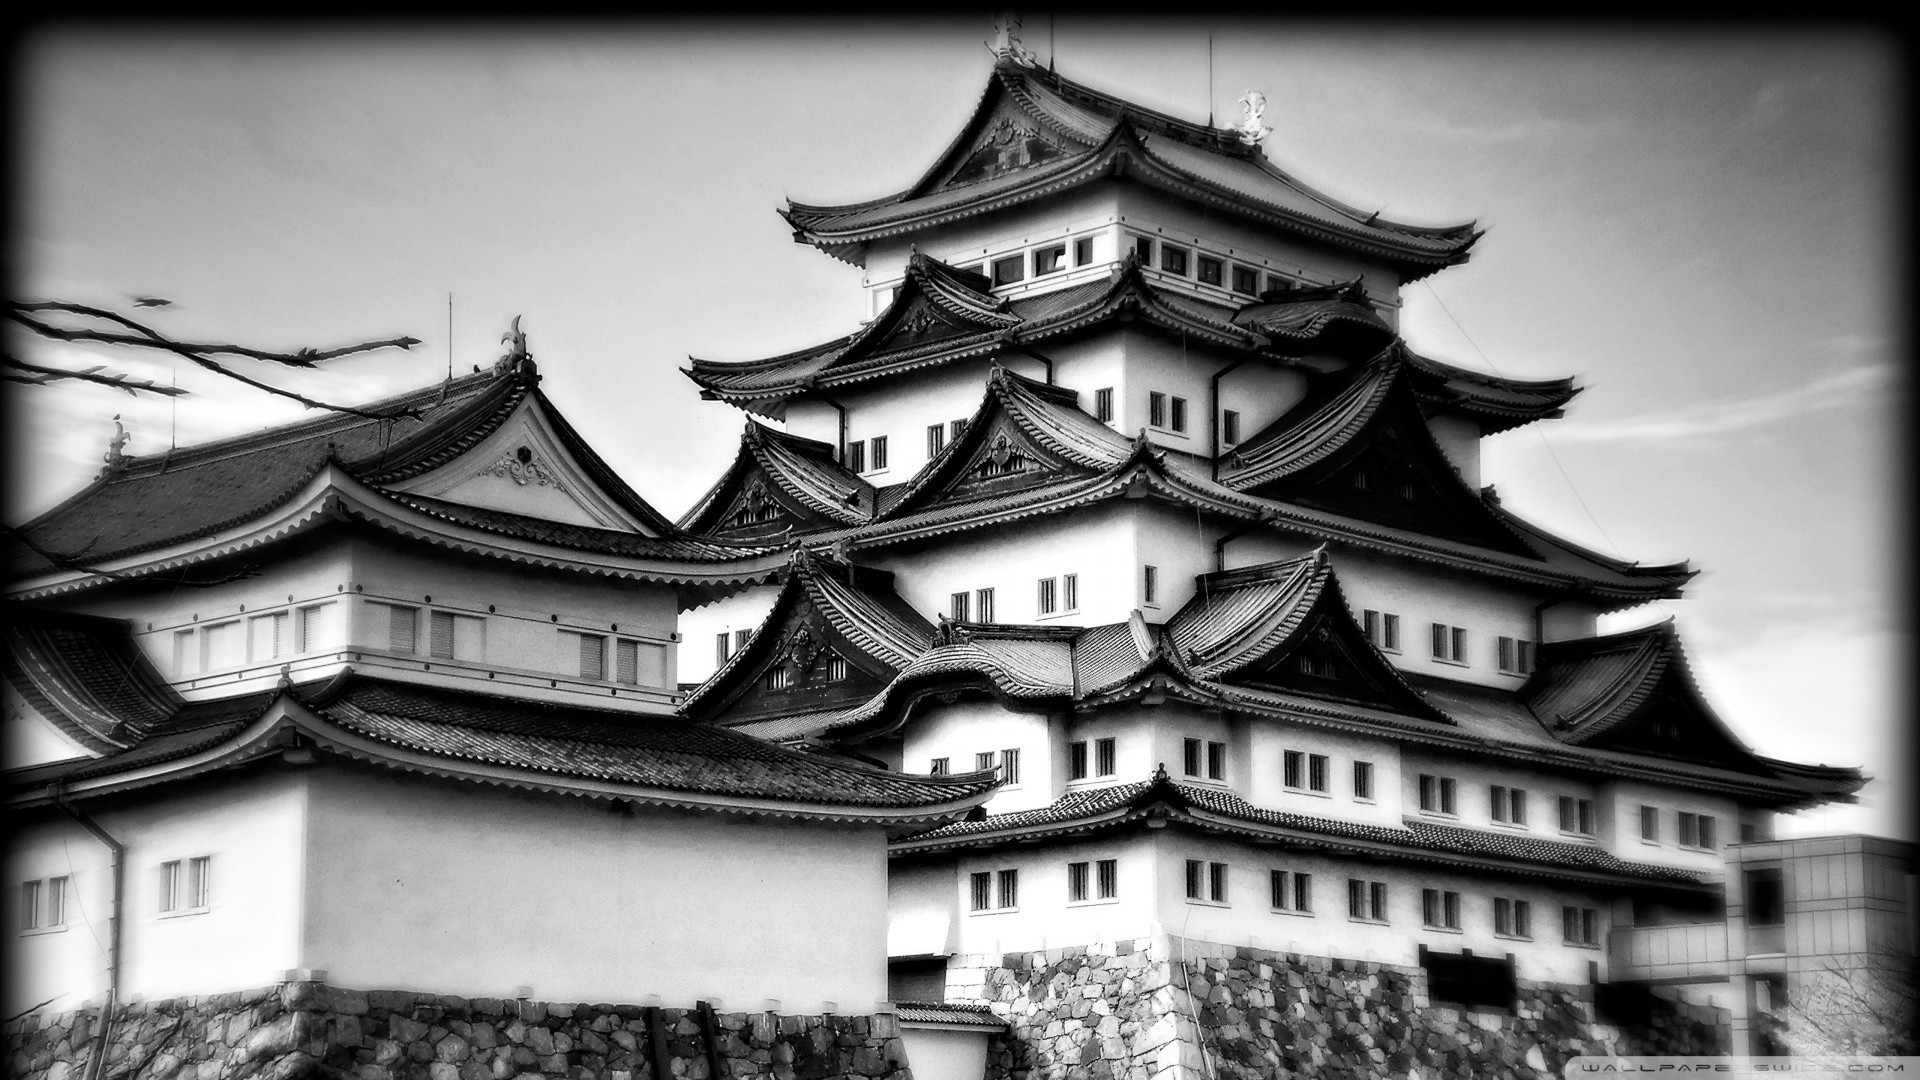 1920x1080 A great look at one of the most famous castles in Japan. Nagoya Castle is  really a beauty. Come and see it in black and white HDR!